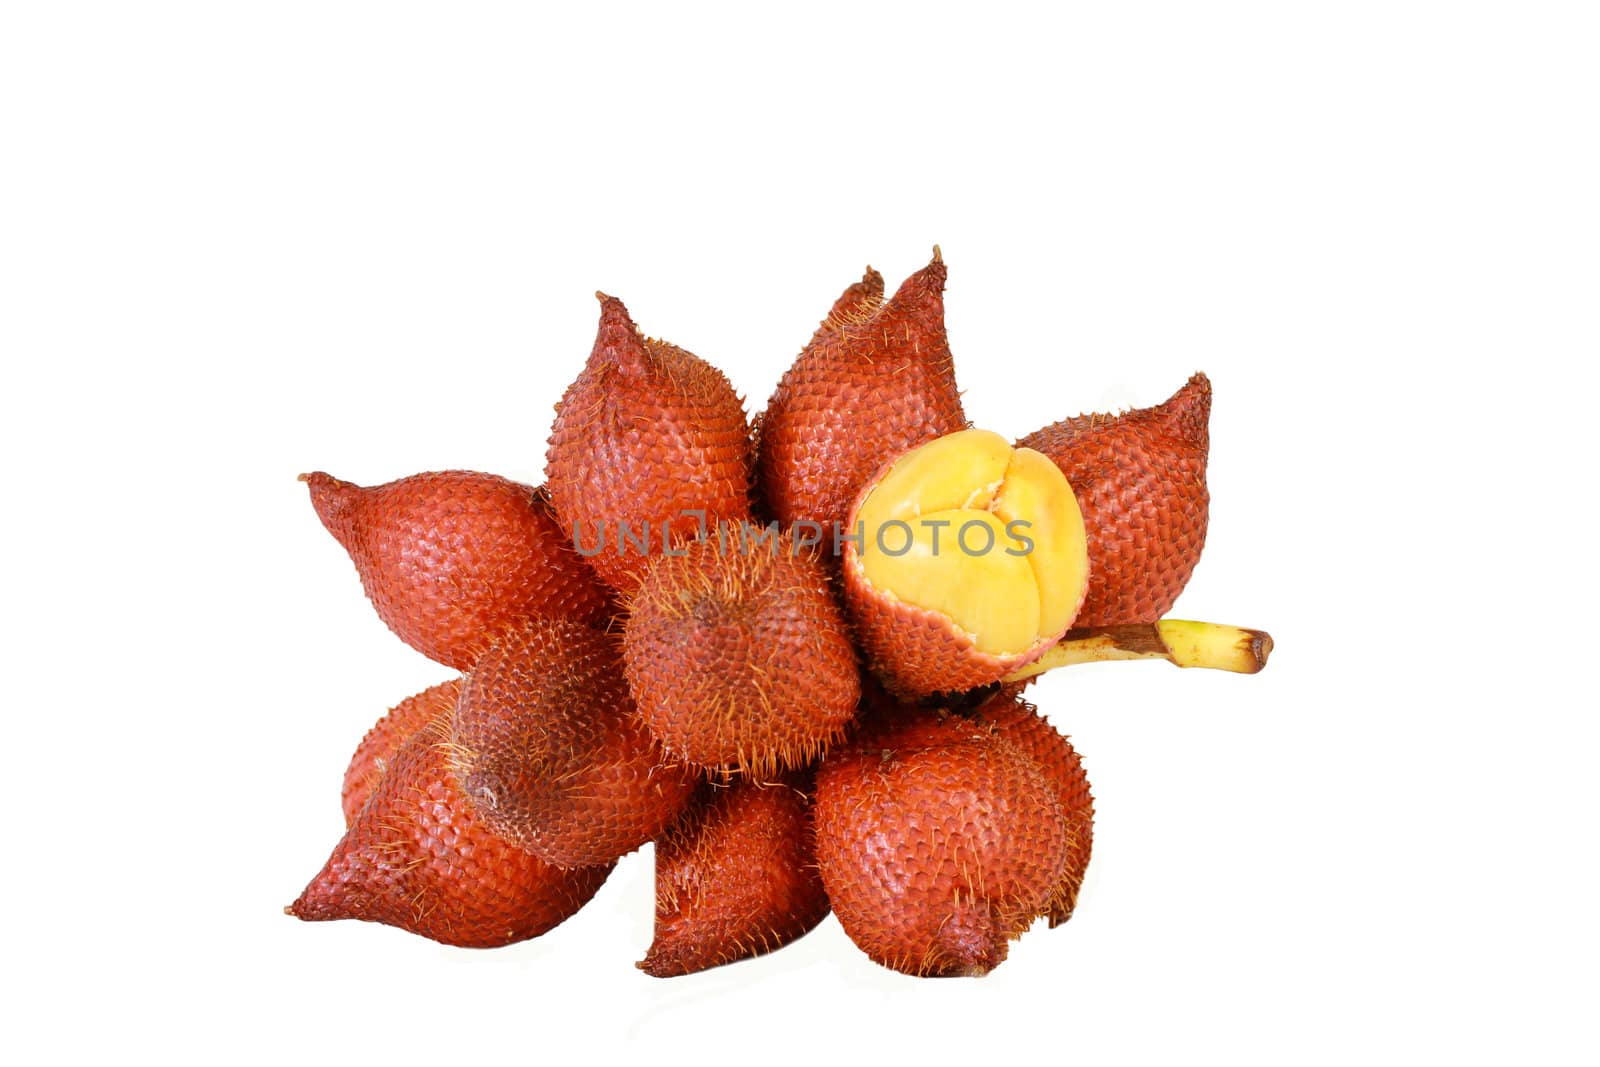 Sala or Zalacca, sweet and sour fruit from Thailand isolated on